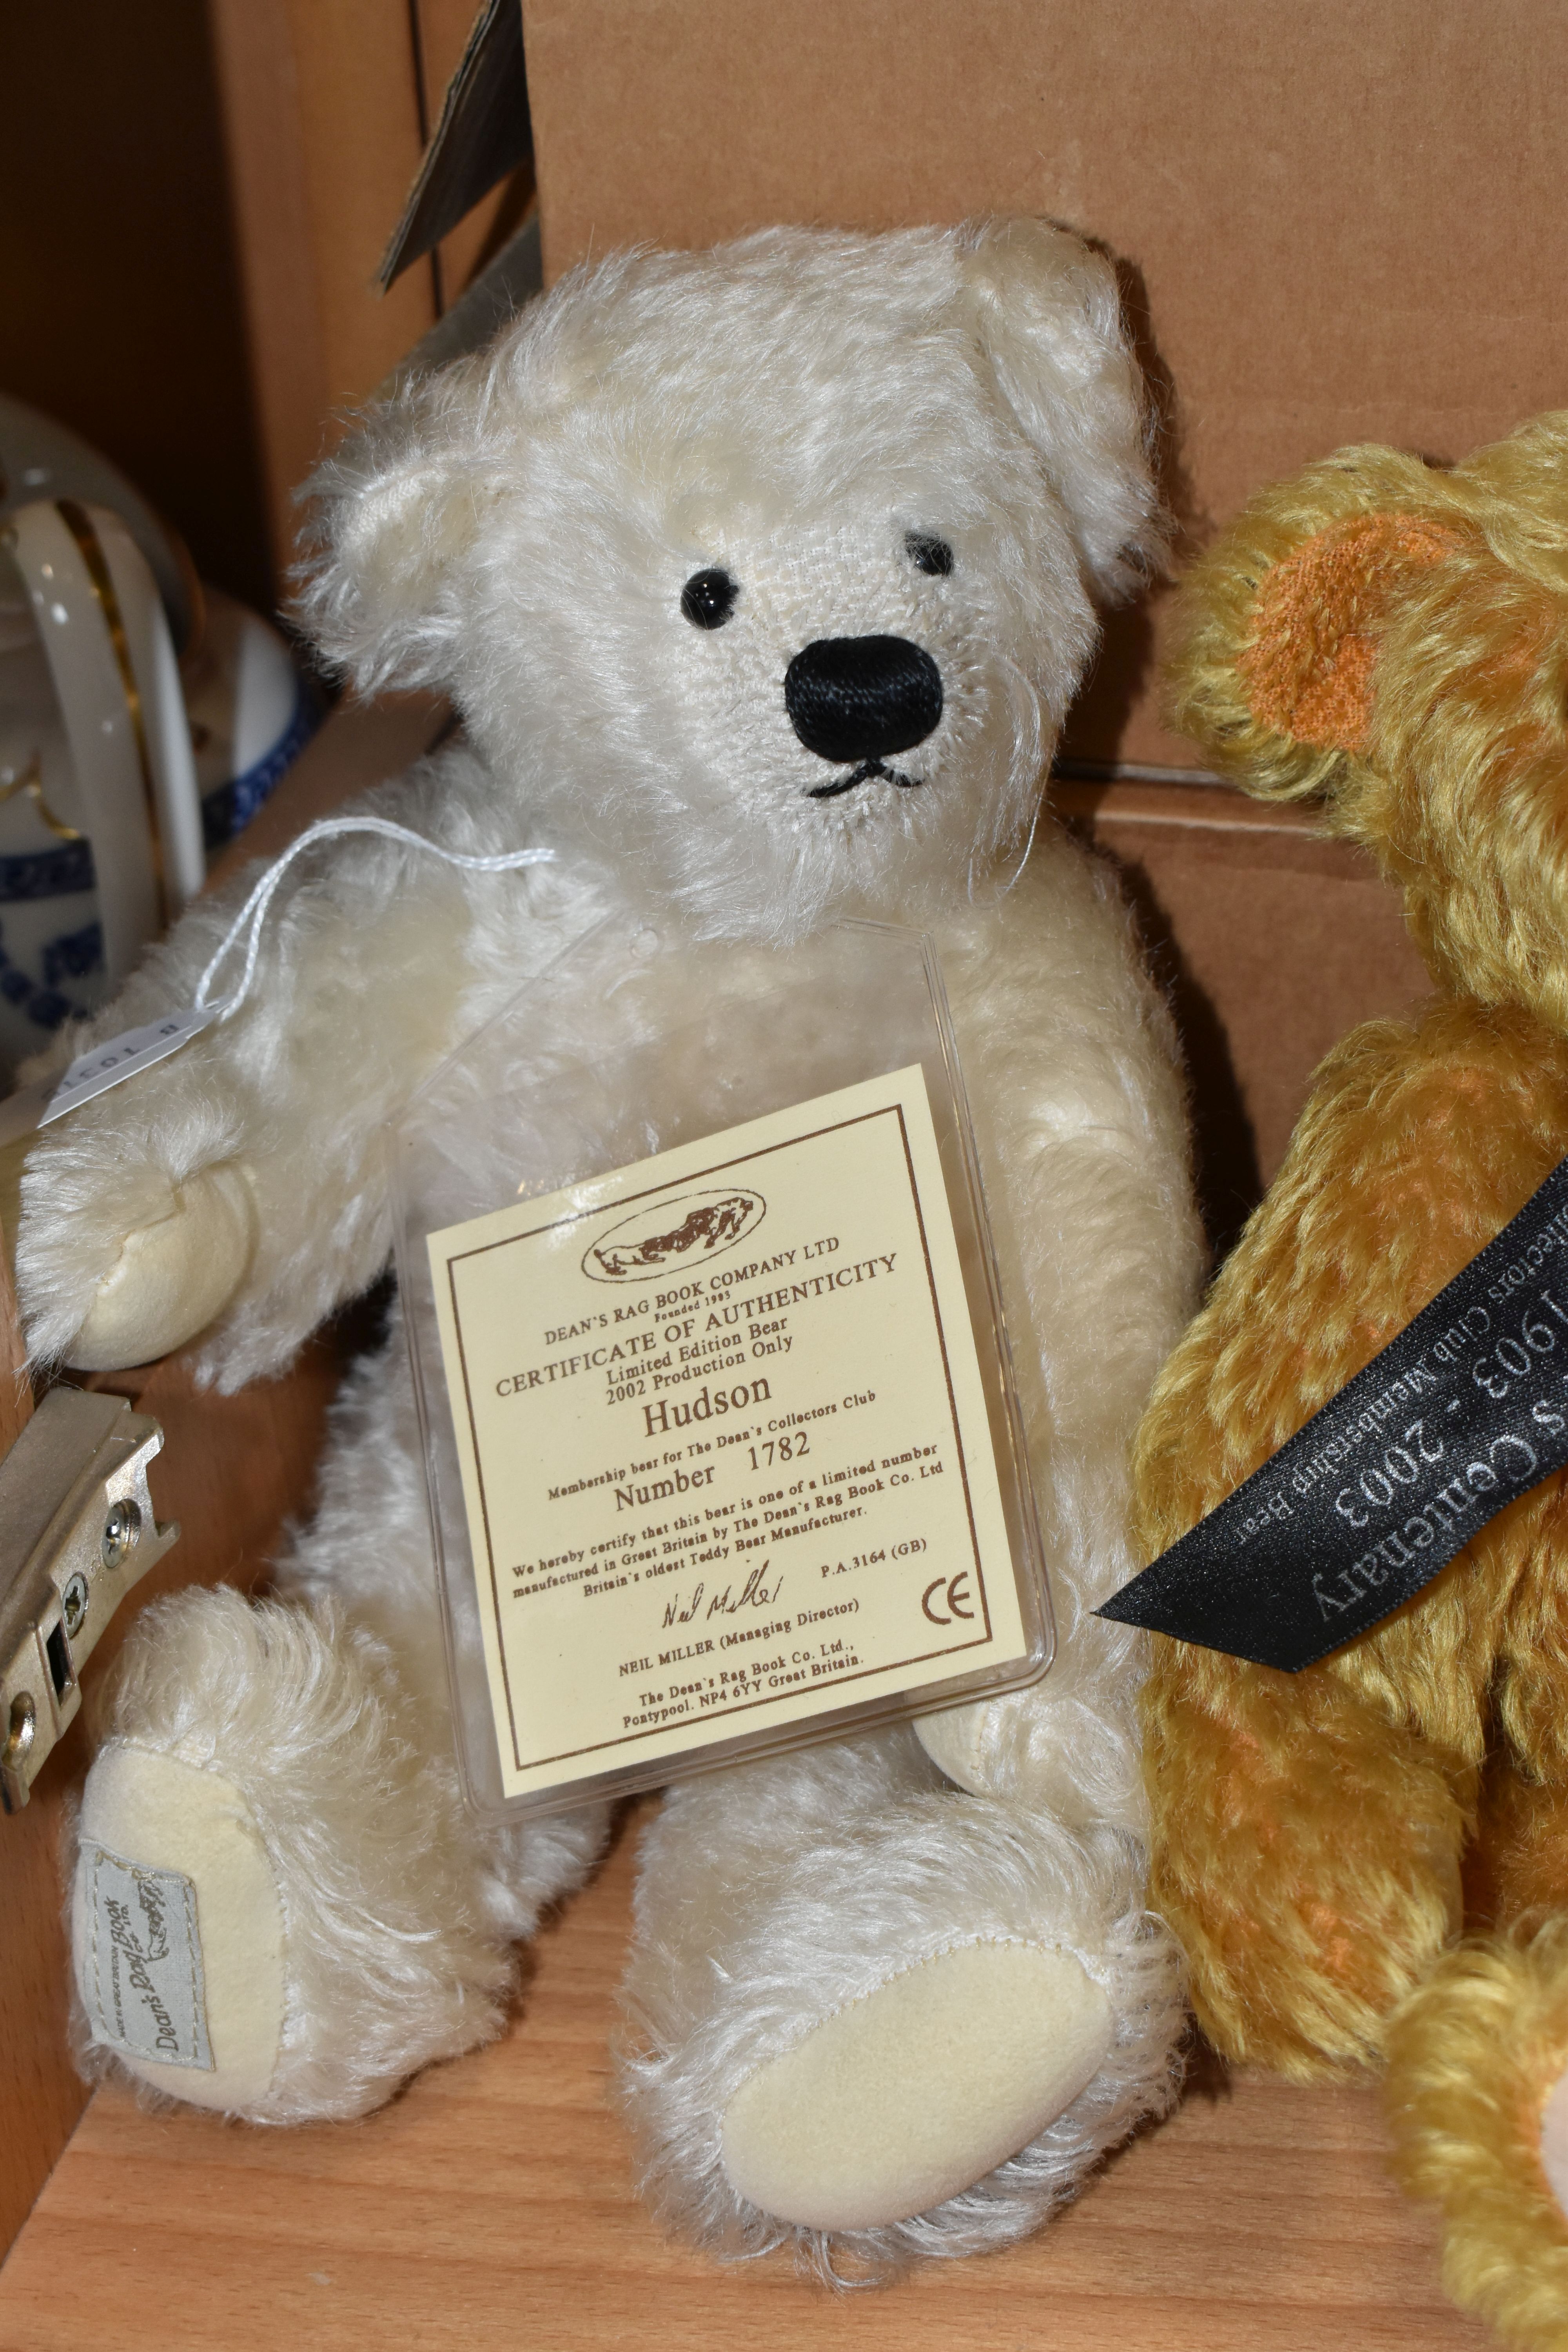 THREE BOXED DEAN'S RAG BOOK LIMITED EDITION TEDDY BEARS, membership bears for The Dean's - Image 2 of 4